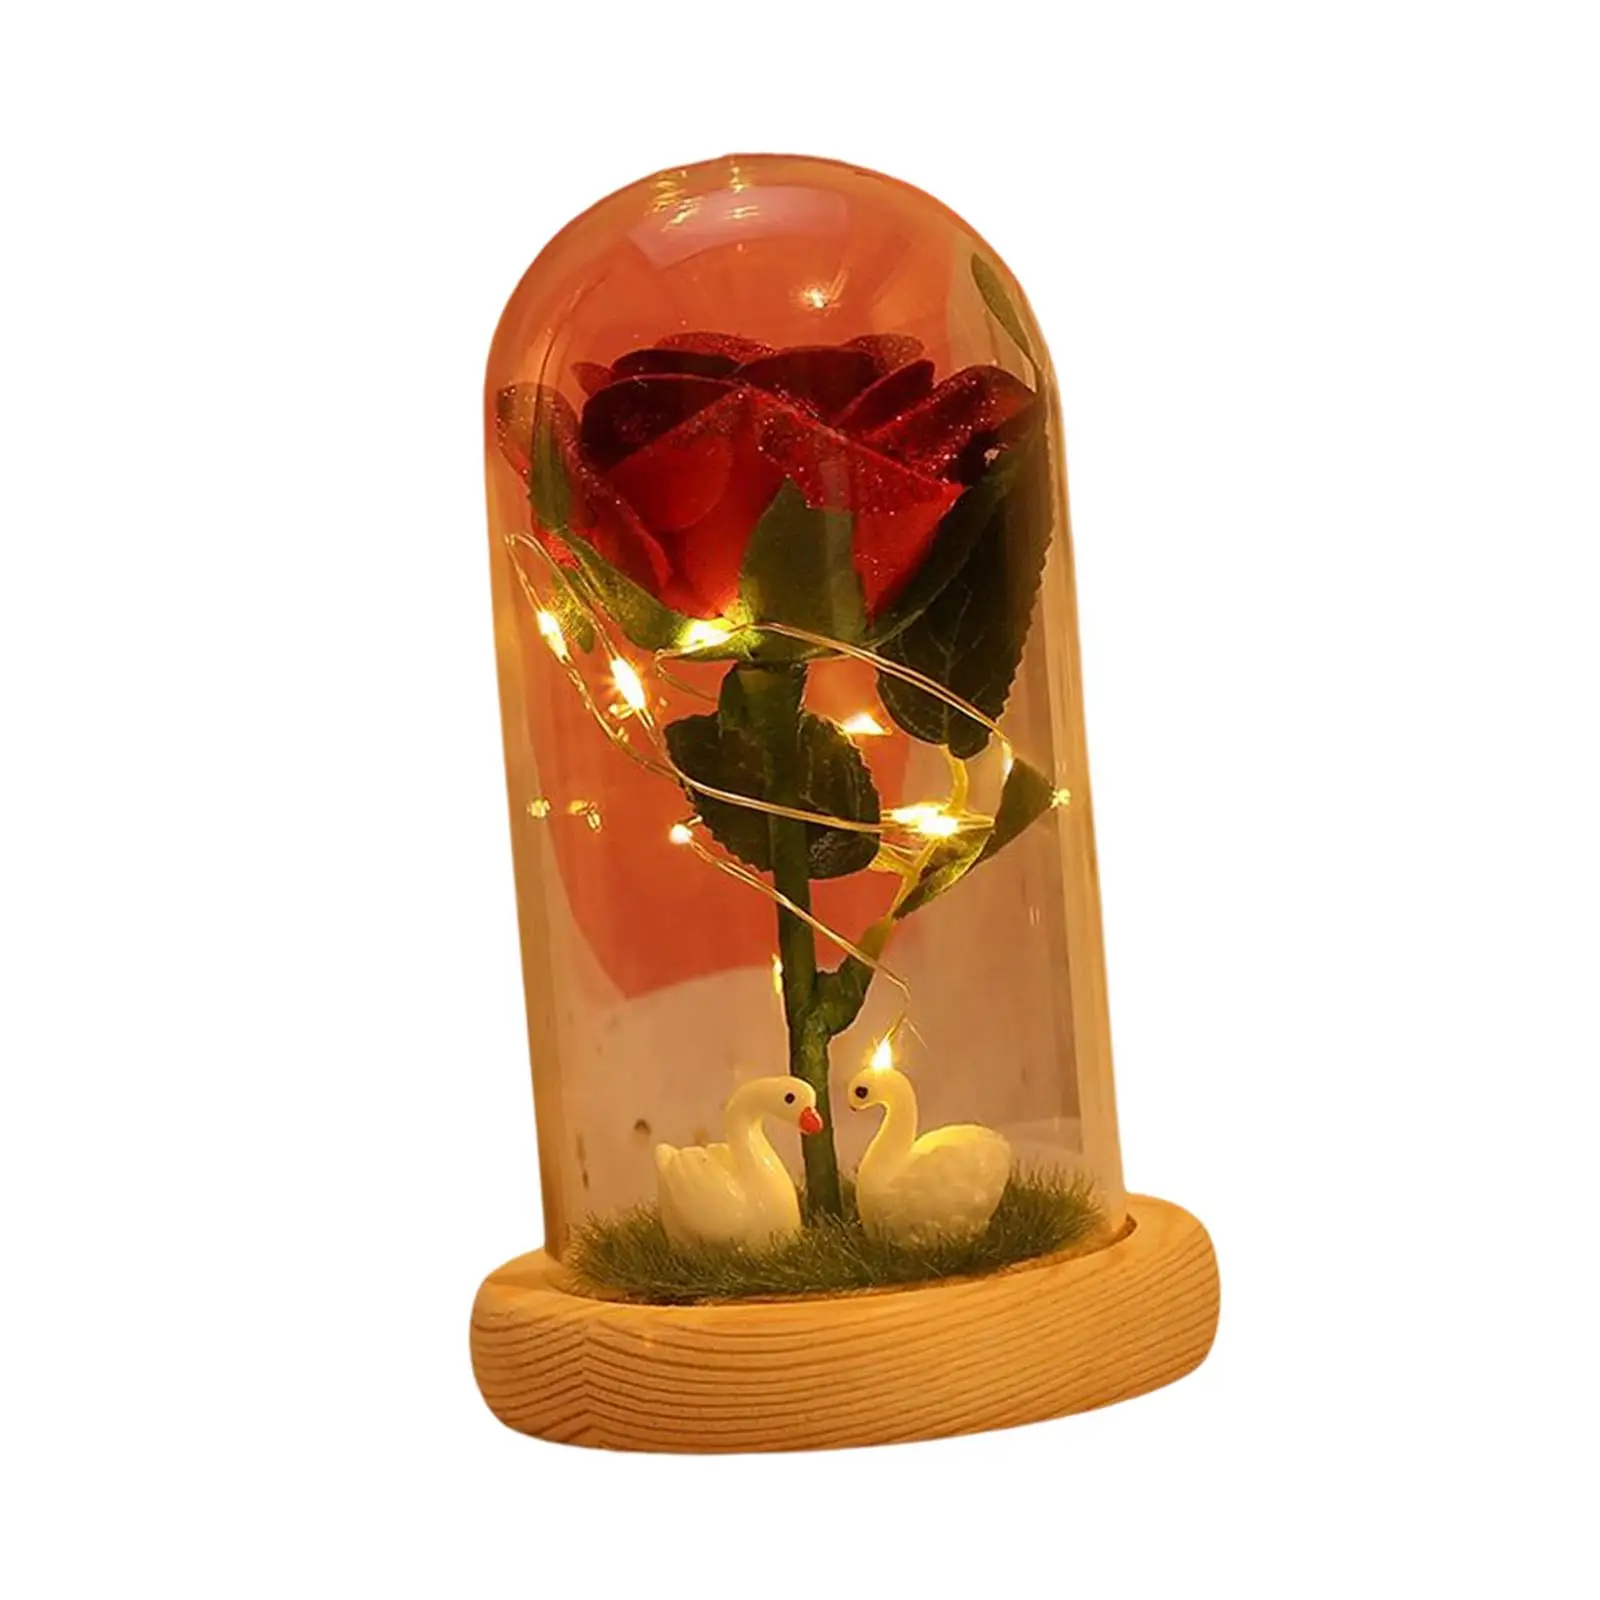 Unique Light up Rose Floral Crafts Simulated Flowers Light W/ Base Ornaments for Valentines Day Wedding Anniversary Women Girls